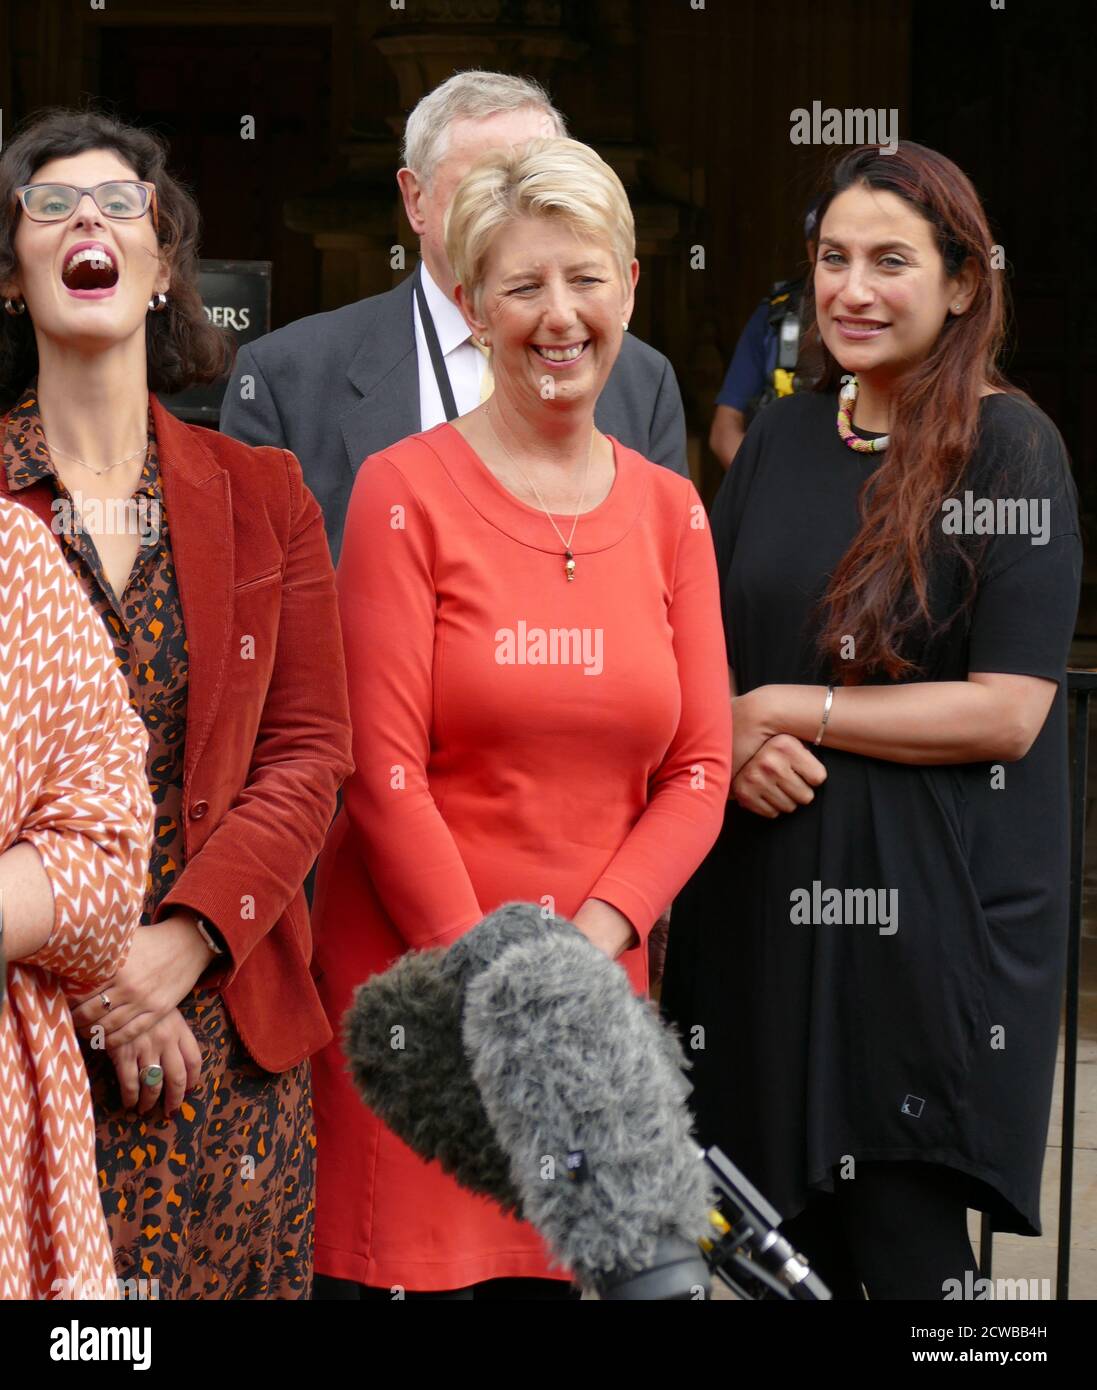 Leyla Moran, Angela Smith and Luciana Berger, Liberal Democratic Members of the British Parliament return to the House of Commons after the Supreme Court overturned the Prorogation of Parliament in September 2019. Stock Photo